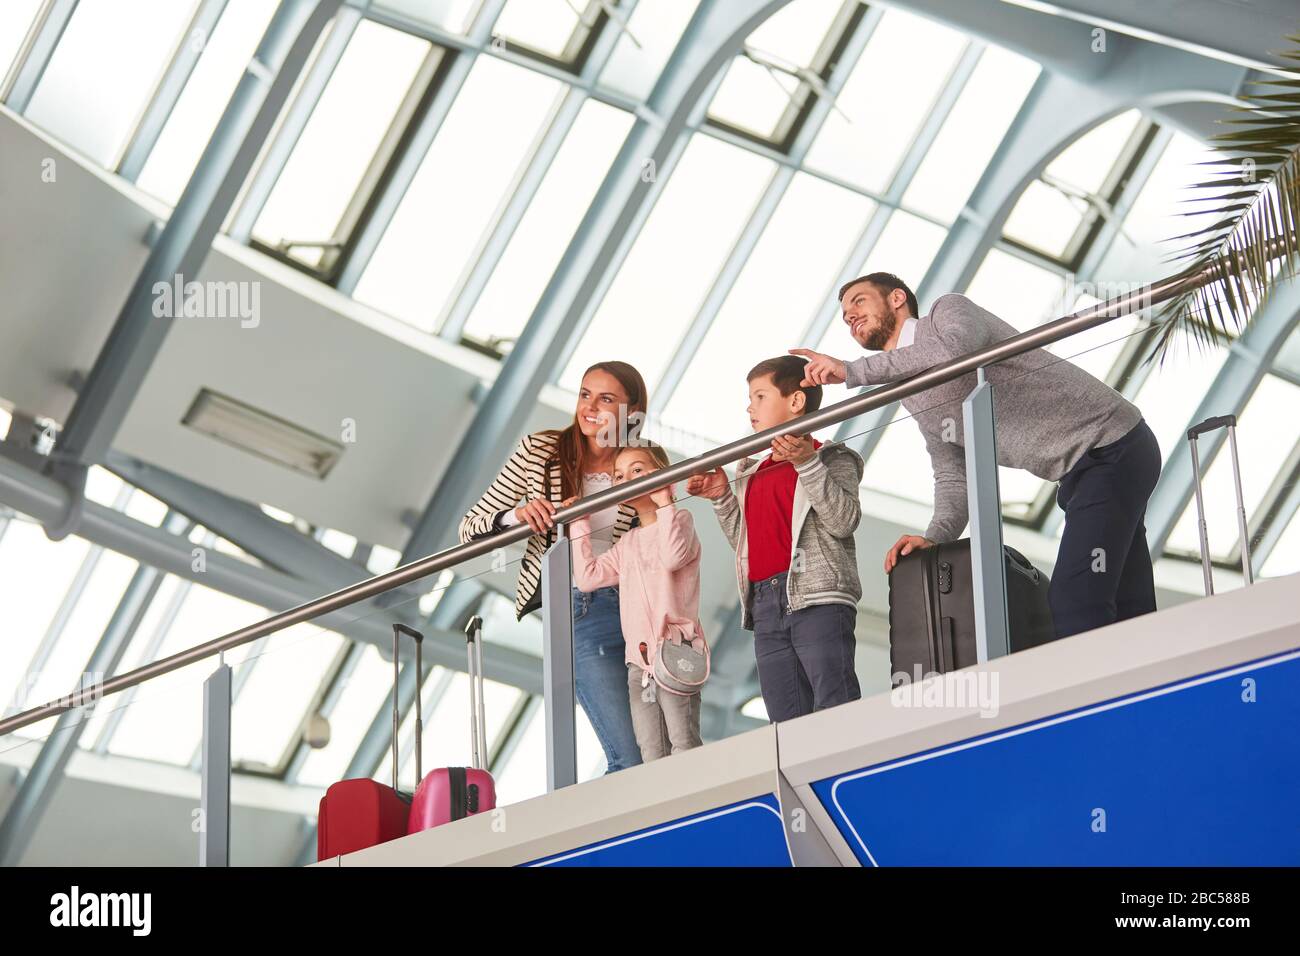 Family with two children and luggage in the airport on the go on vacation Stock Photo